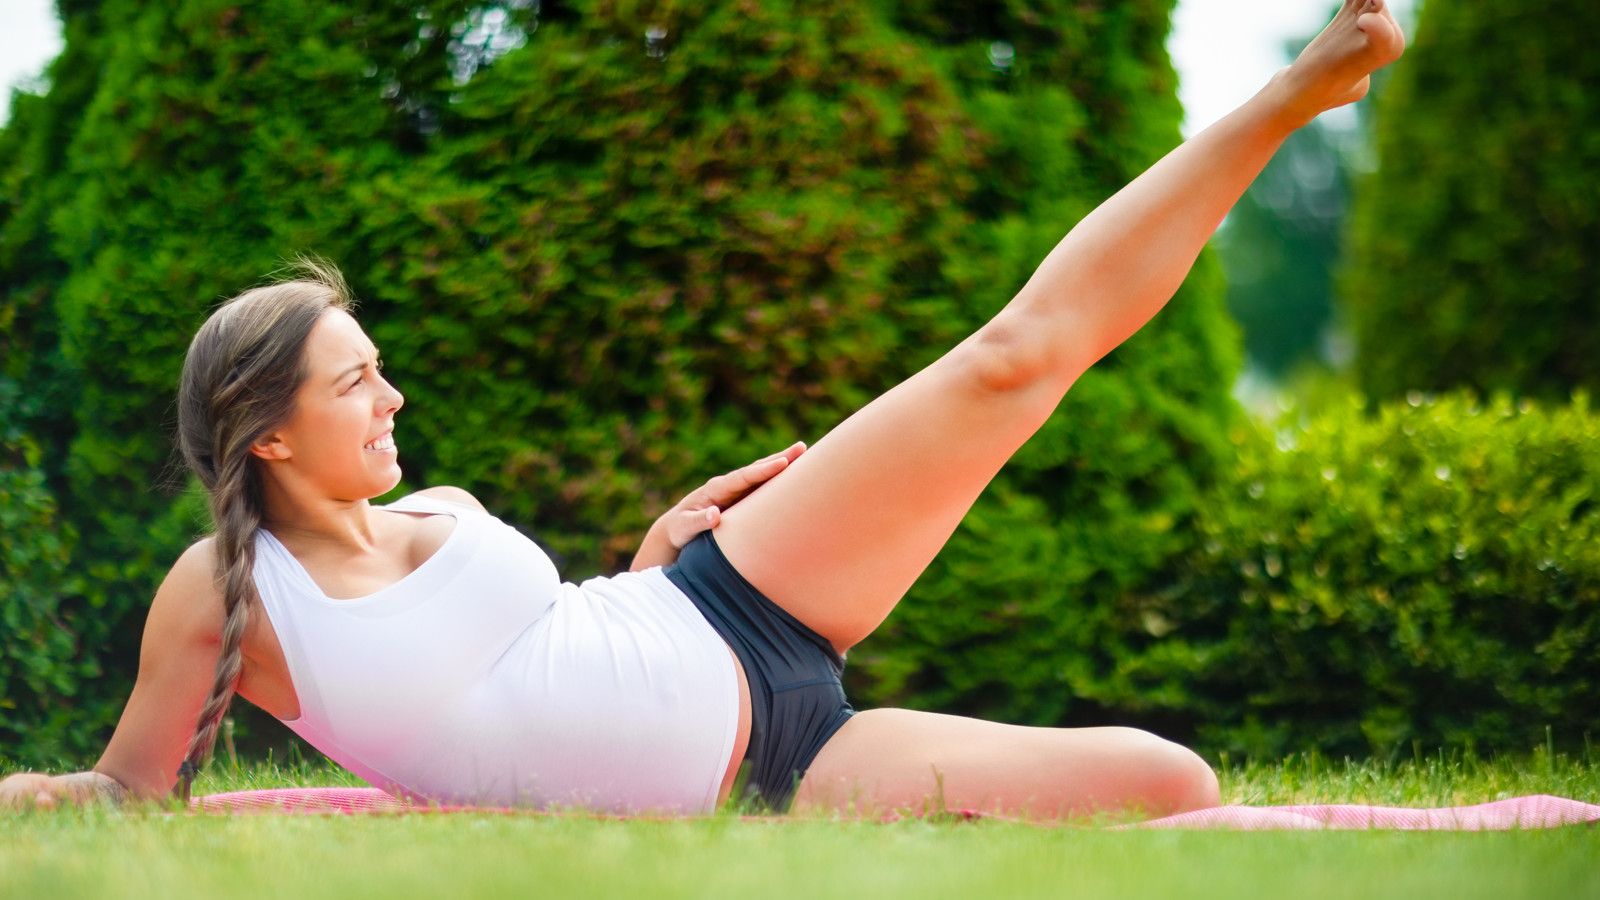 Pregnant? Here's What to Know About Stretching When You're Expecting!